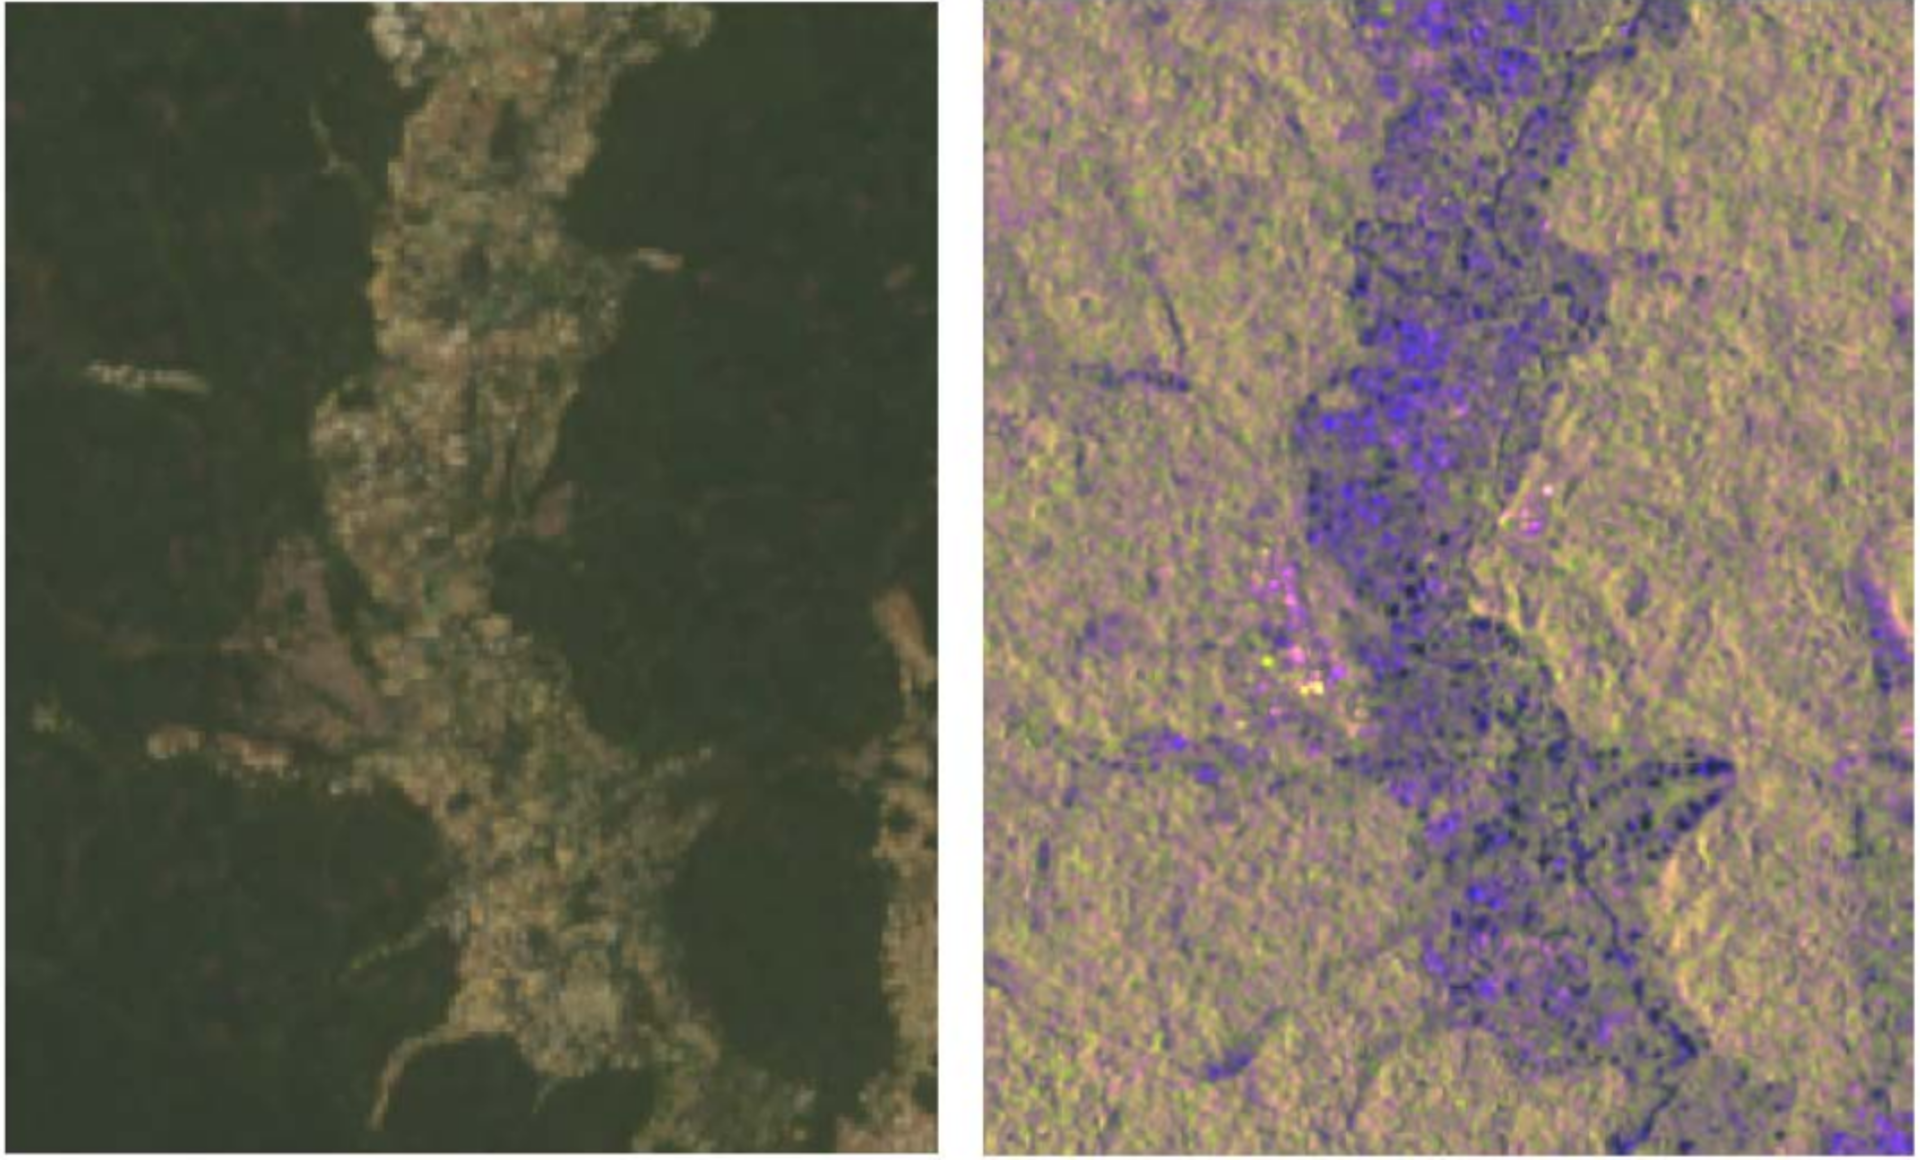 Satellite images of potentially illegal land mines in Obuasi, Ghana, in May 2018